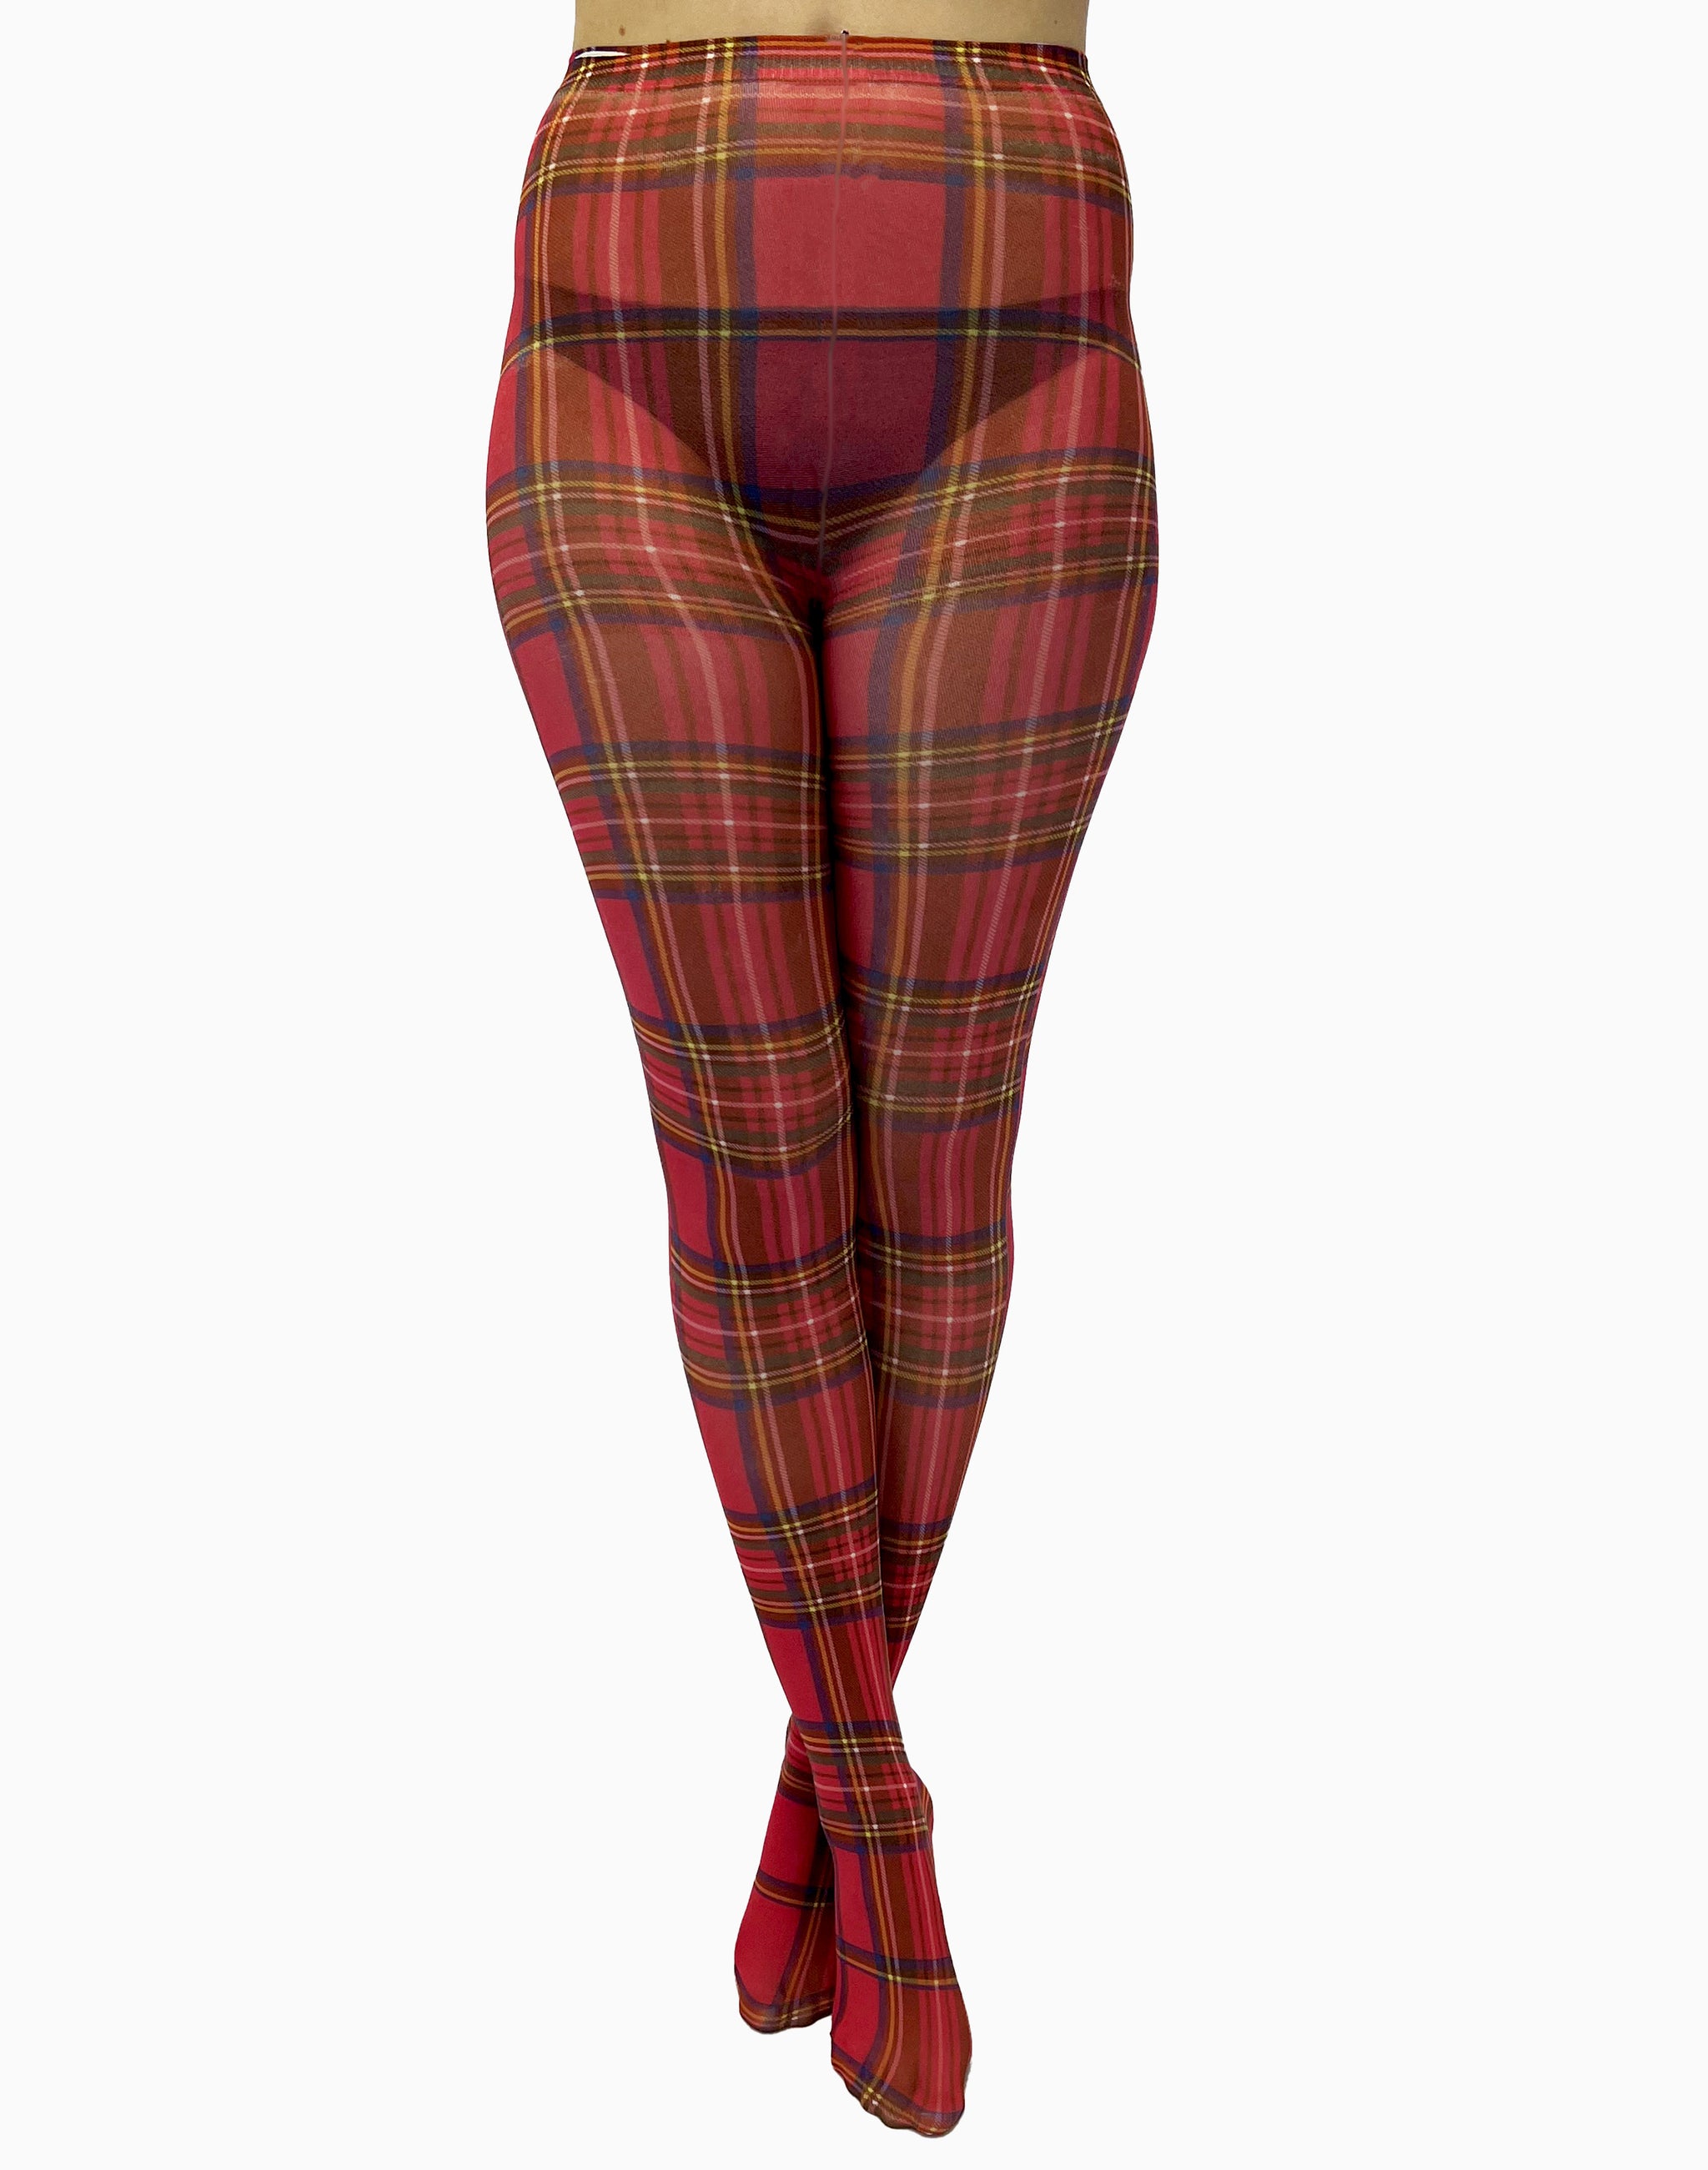 Teal Plaid Patterned Tights for Women -  Canada